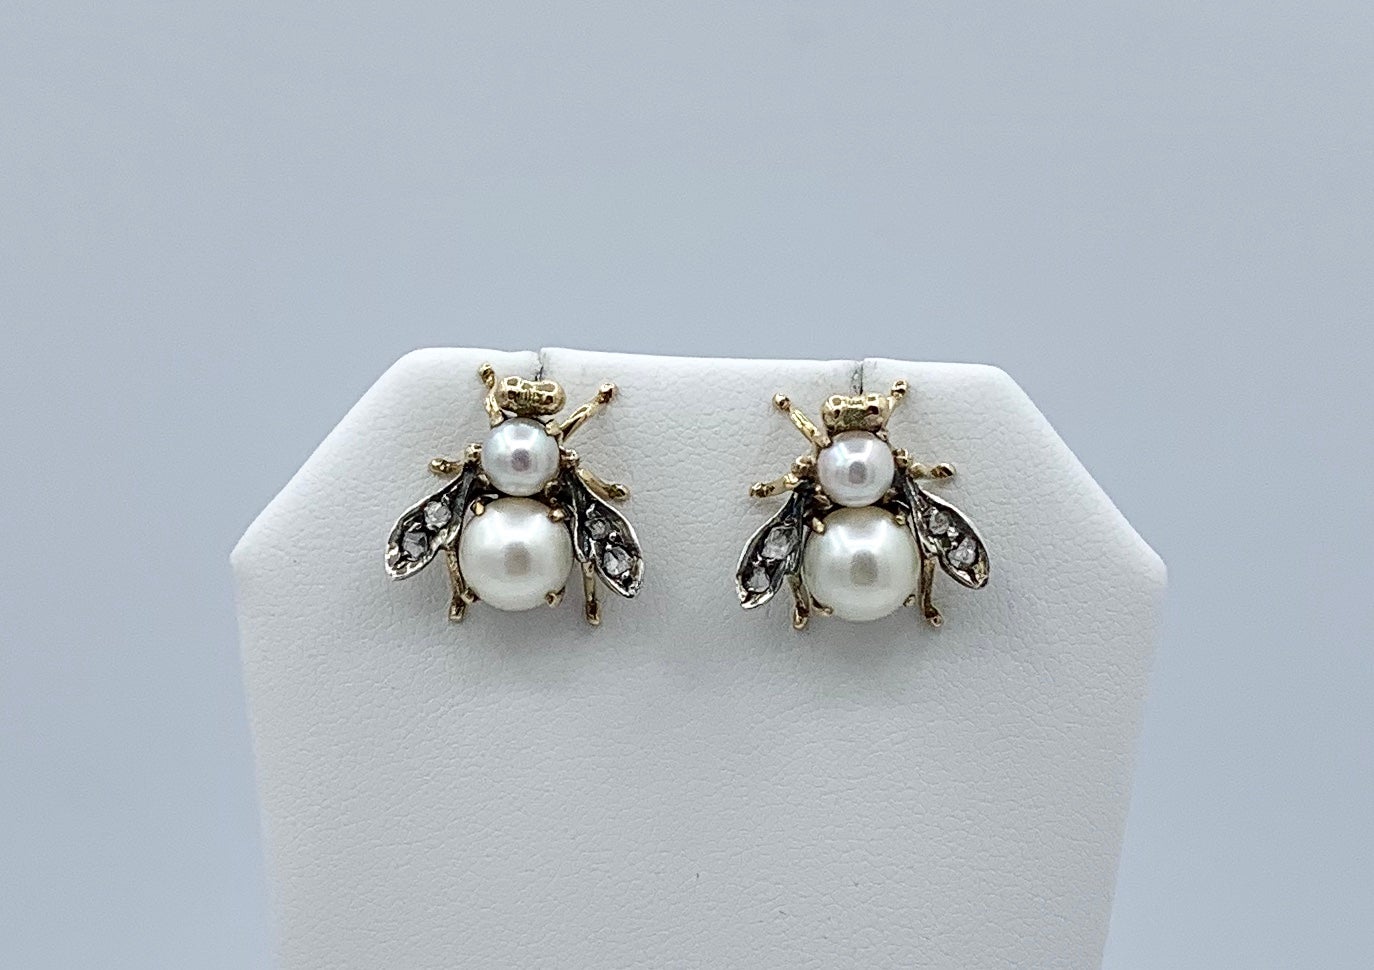 This is a wonderful pair of rare antique Victorian Fly Insect Earrings with Rose Cut Diamonds and Pearls in 14 Karat White and Yellow Gold.  The Victorian - Edwardian insect jewels are of the highest quality and exude the elegance of the period. 